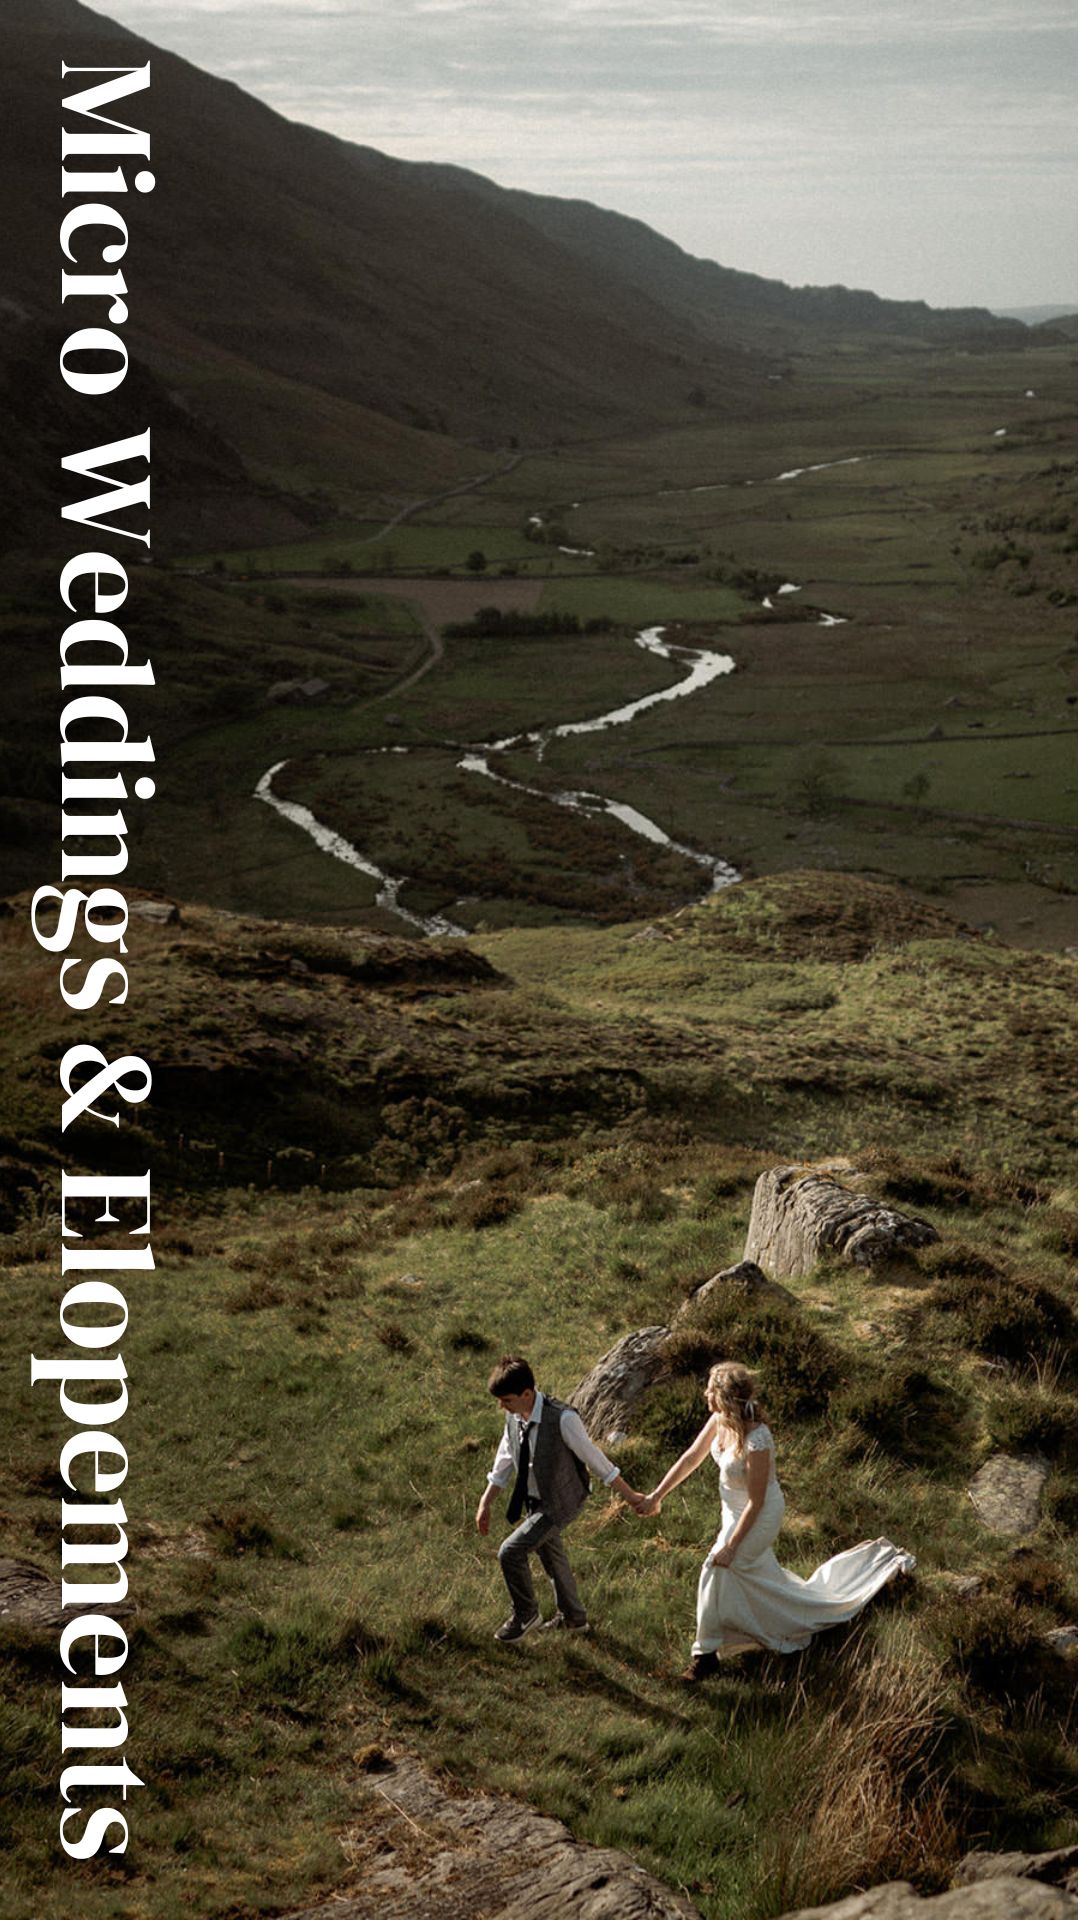 Micro wedding and elopement photography in North Wales